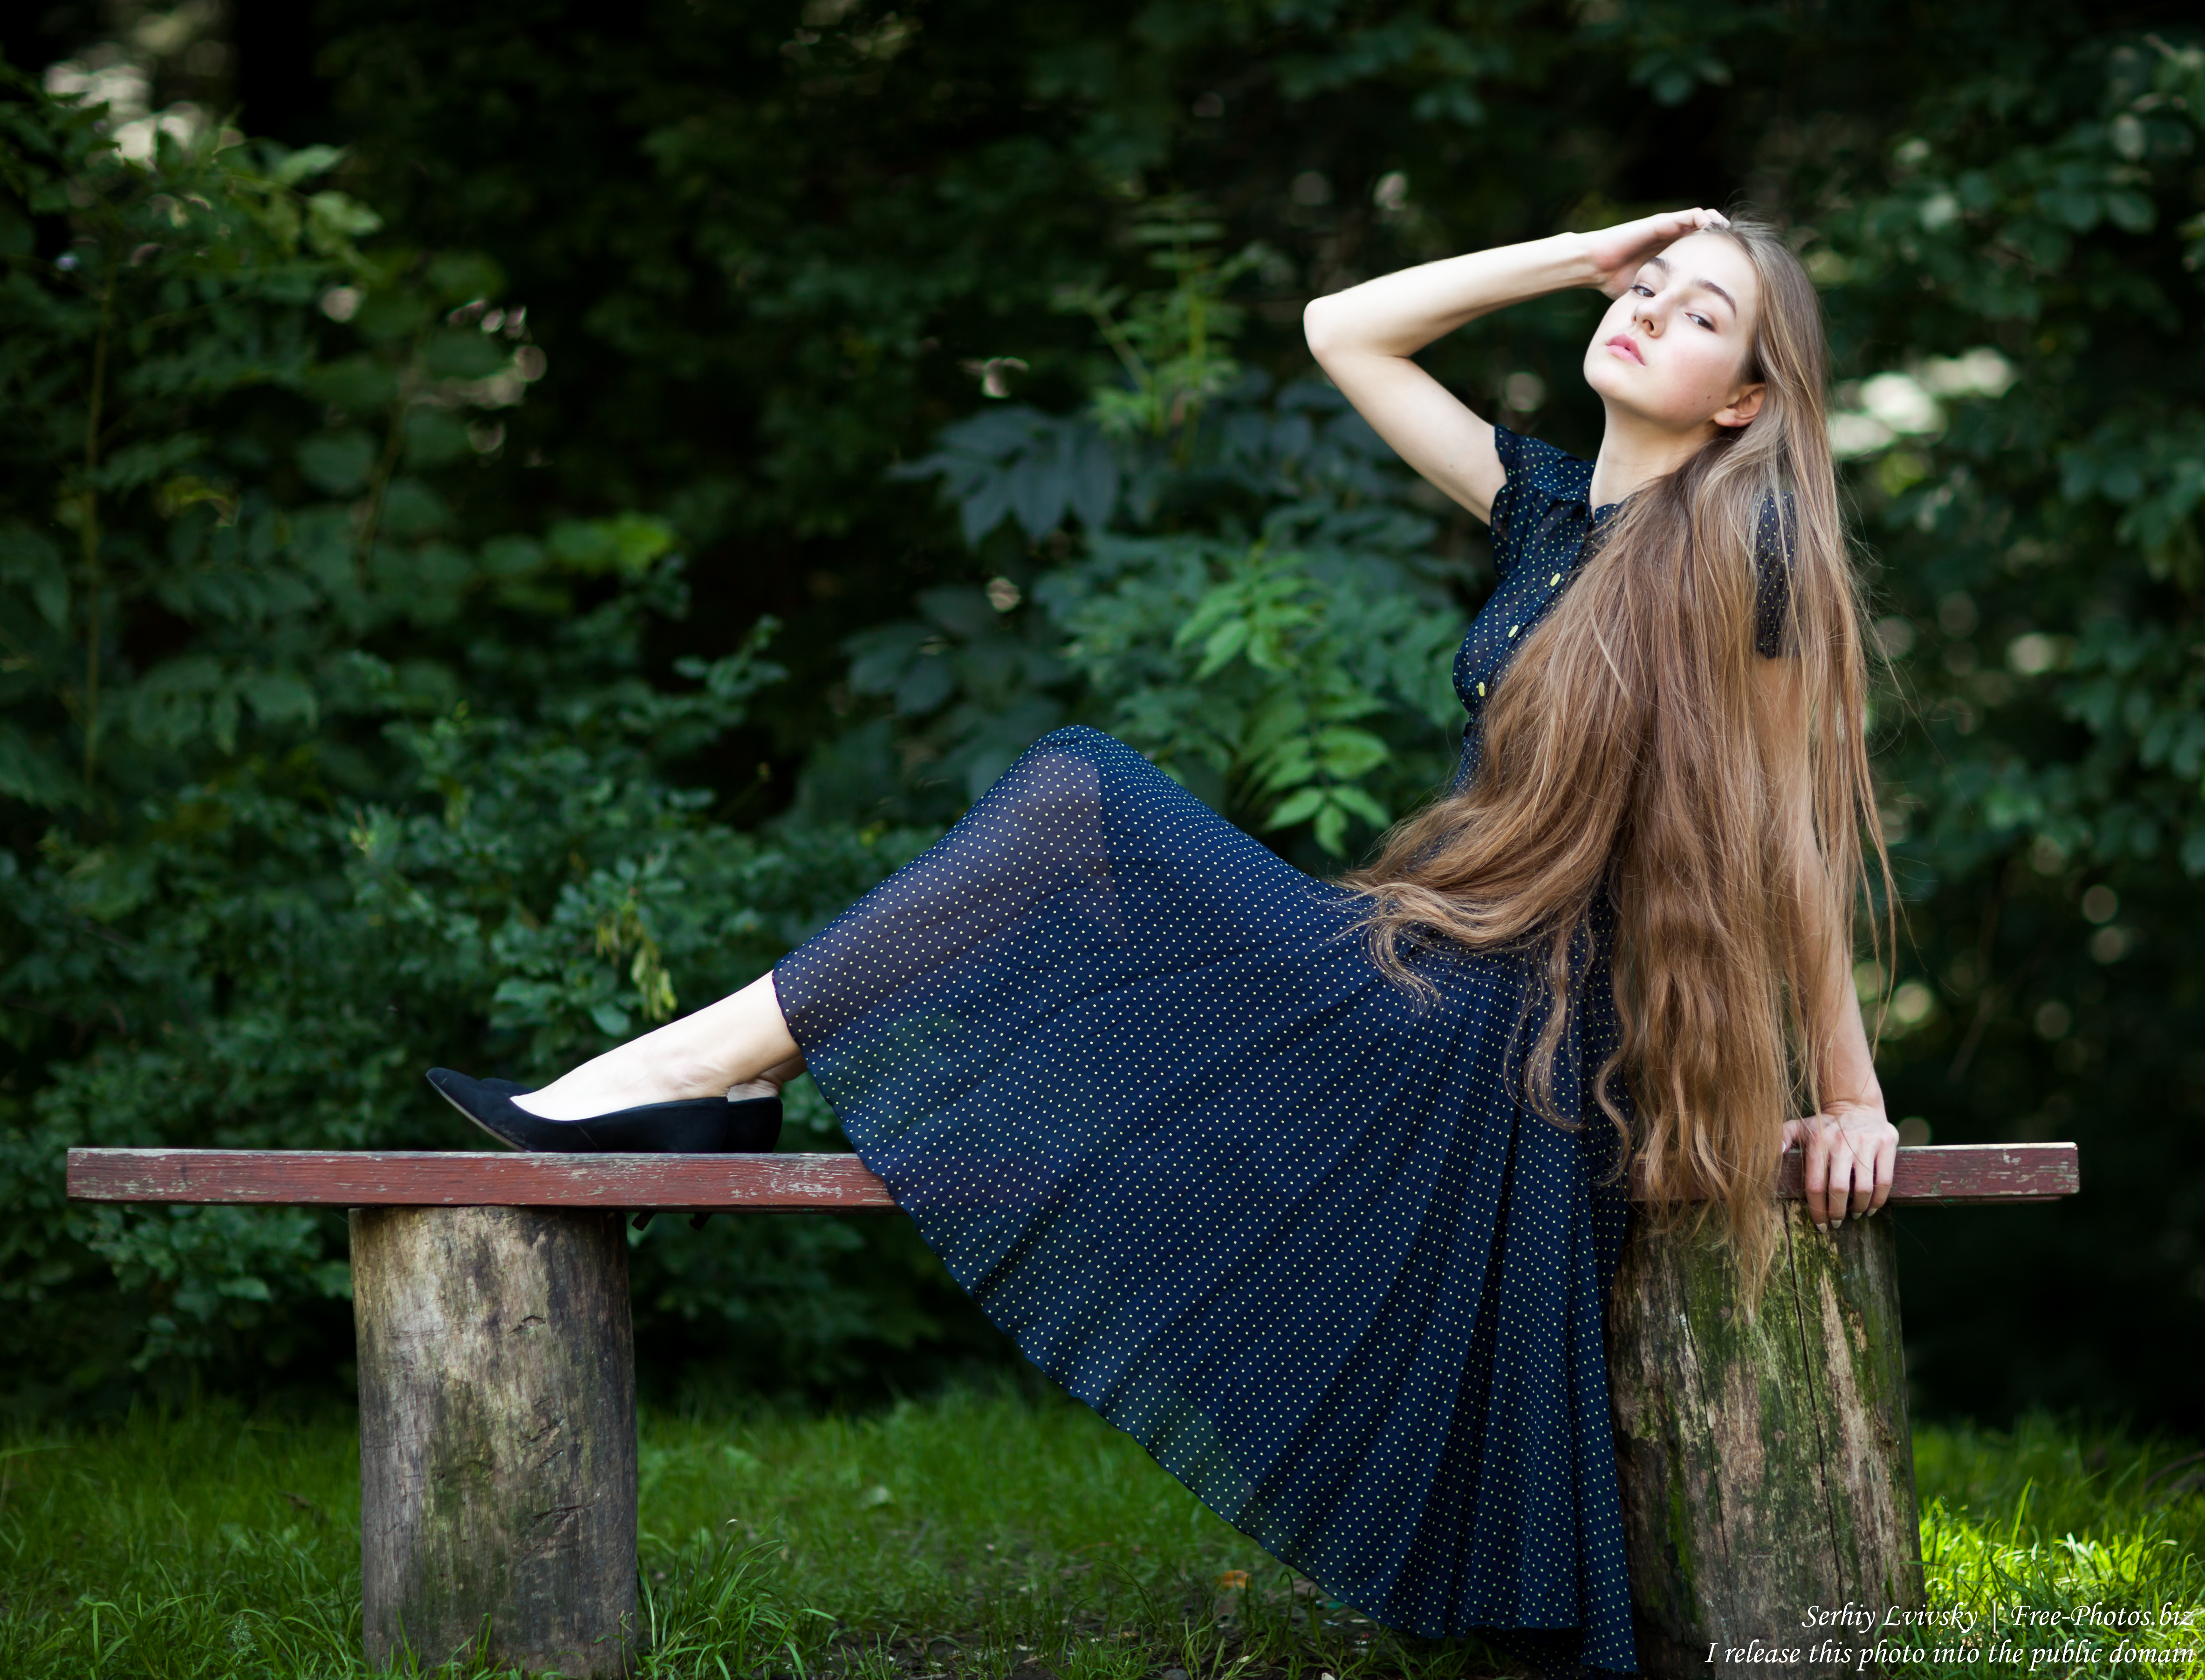 Justyna - a 16-year-old fair-haired girl photographed in June 2018 by Serhiy Lvivsky, picture 22